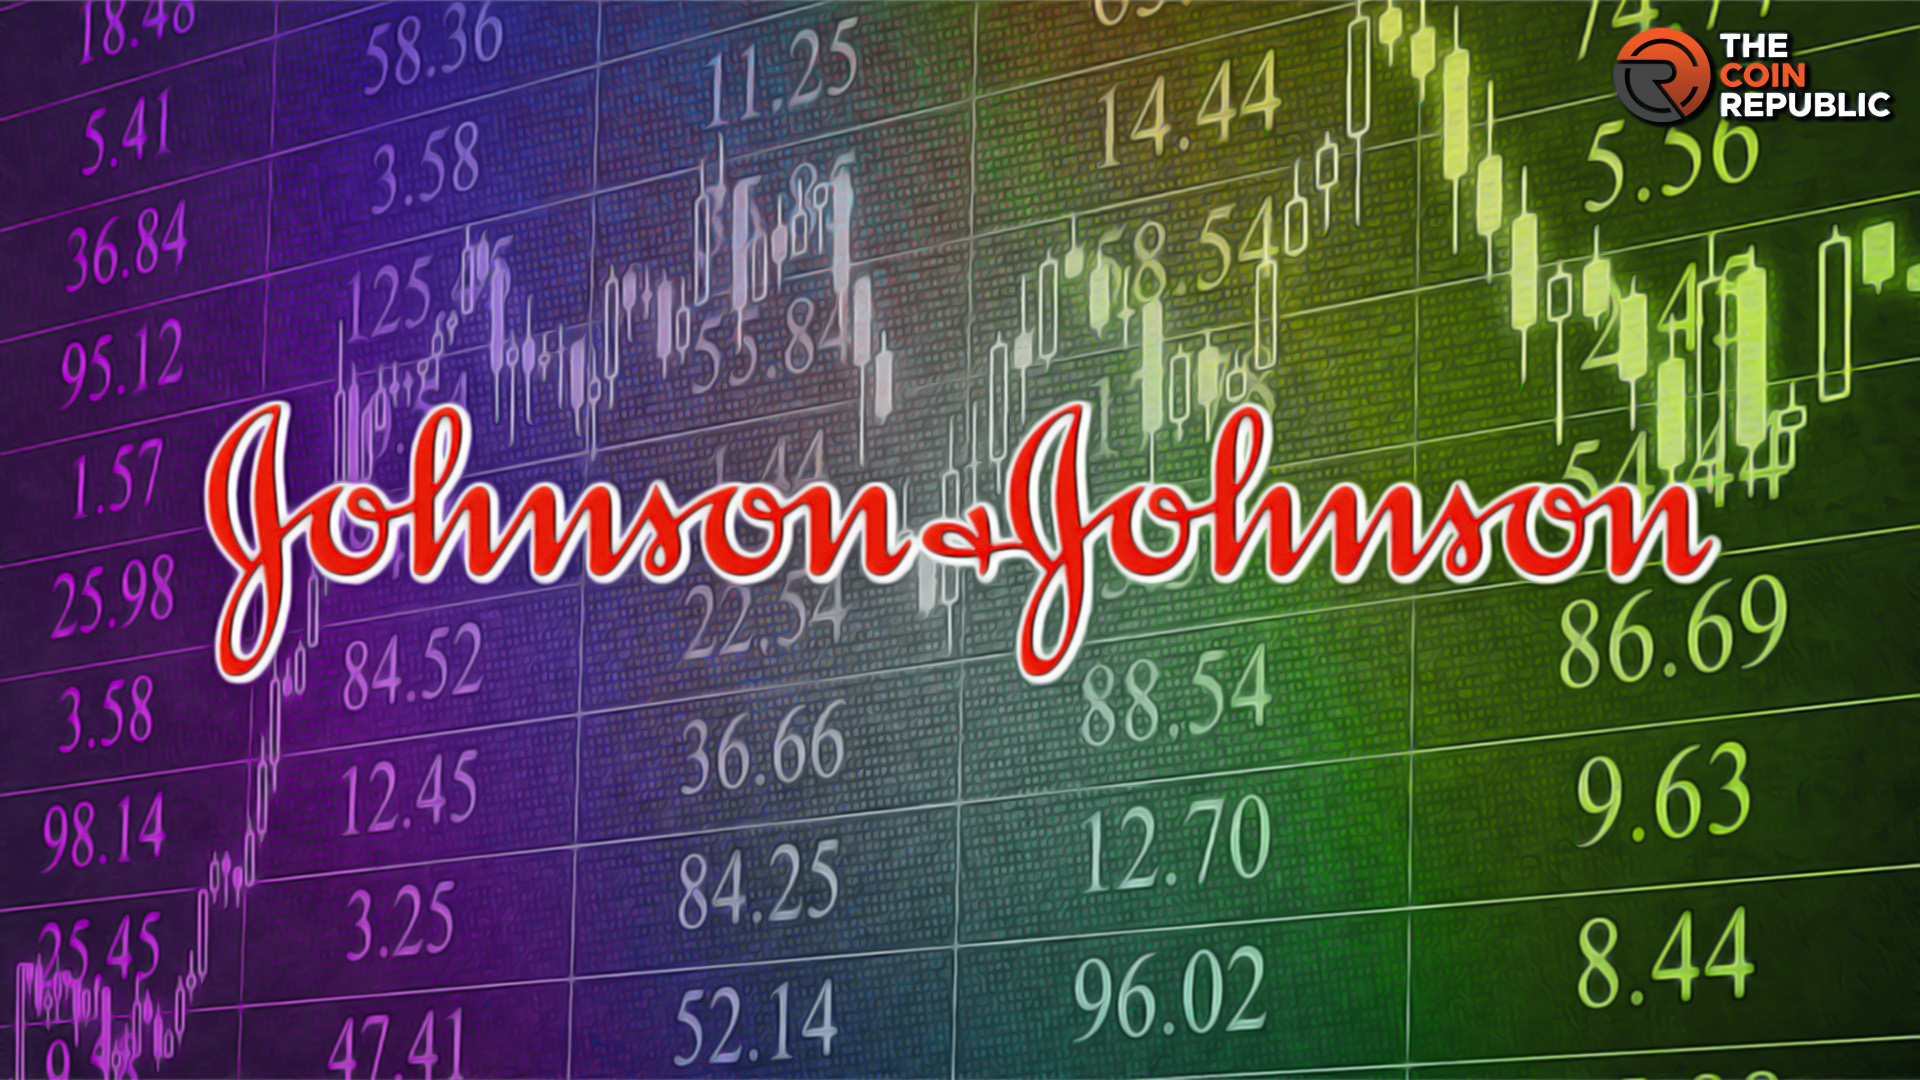 JNJ Stock Forecast: Can Dividends Initiate A Recovery For JNJ?